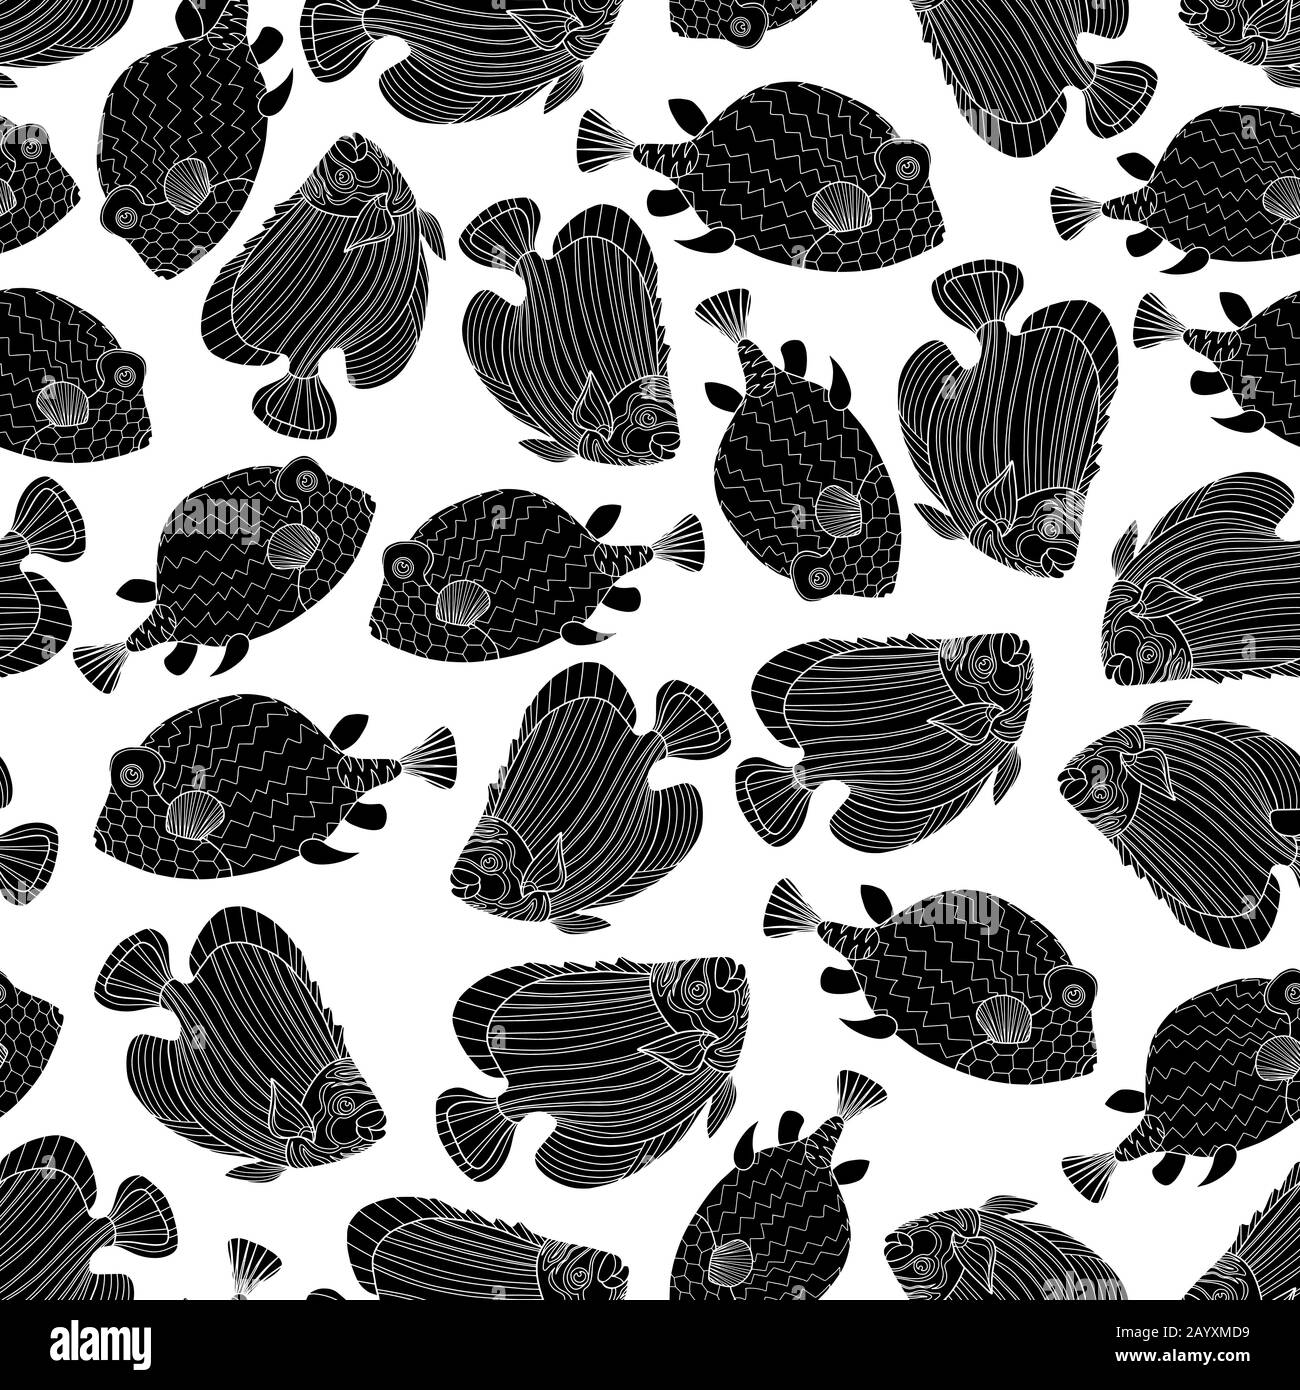 Seamless pattern with black fish in doodle style isolated on white background. Vector coral reef fish outline illustration. Stock Vector